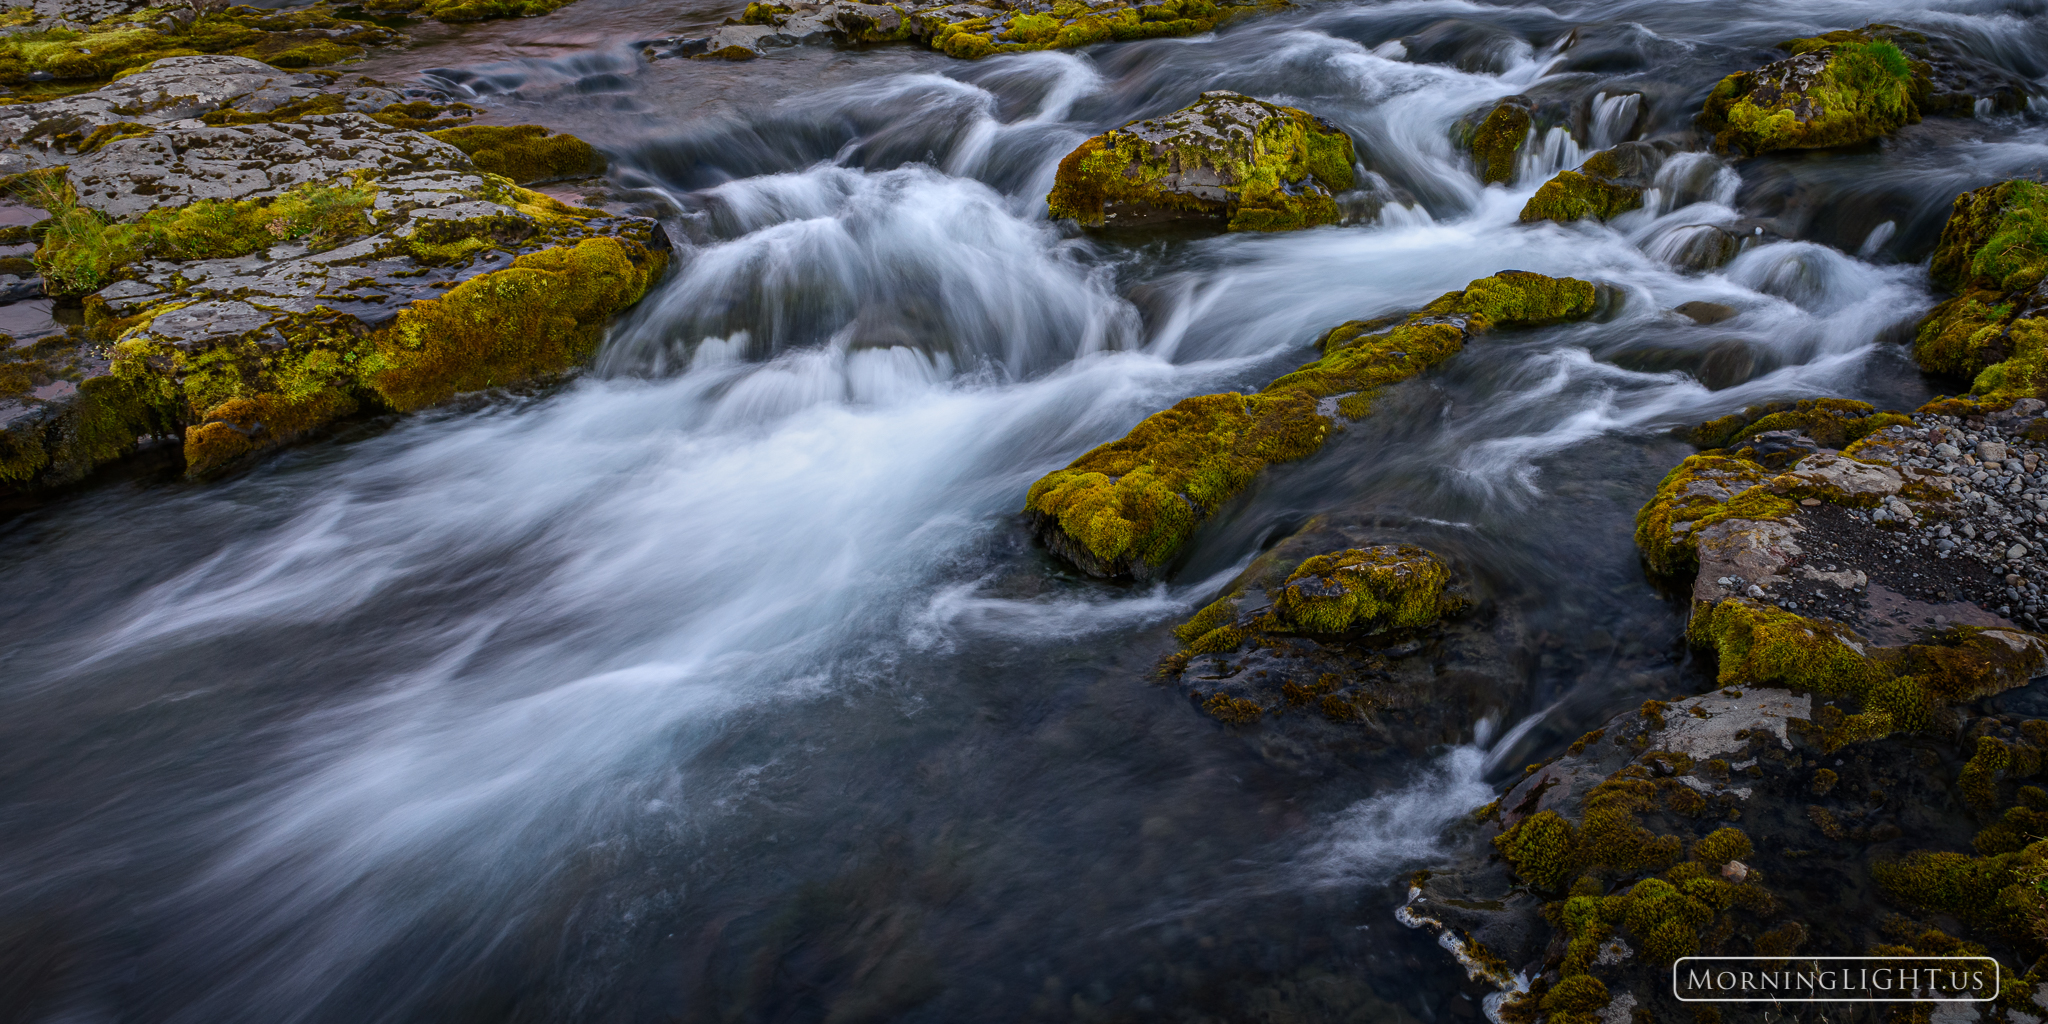 Lush moss covers the rocks beside a rushing stream in western Iceland.